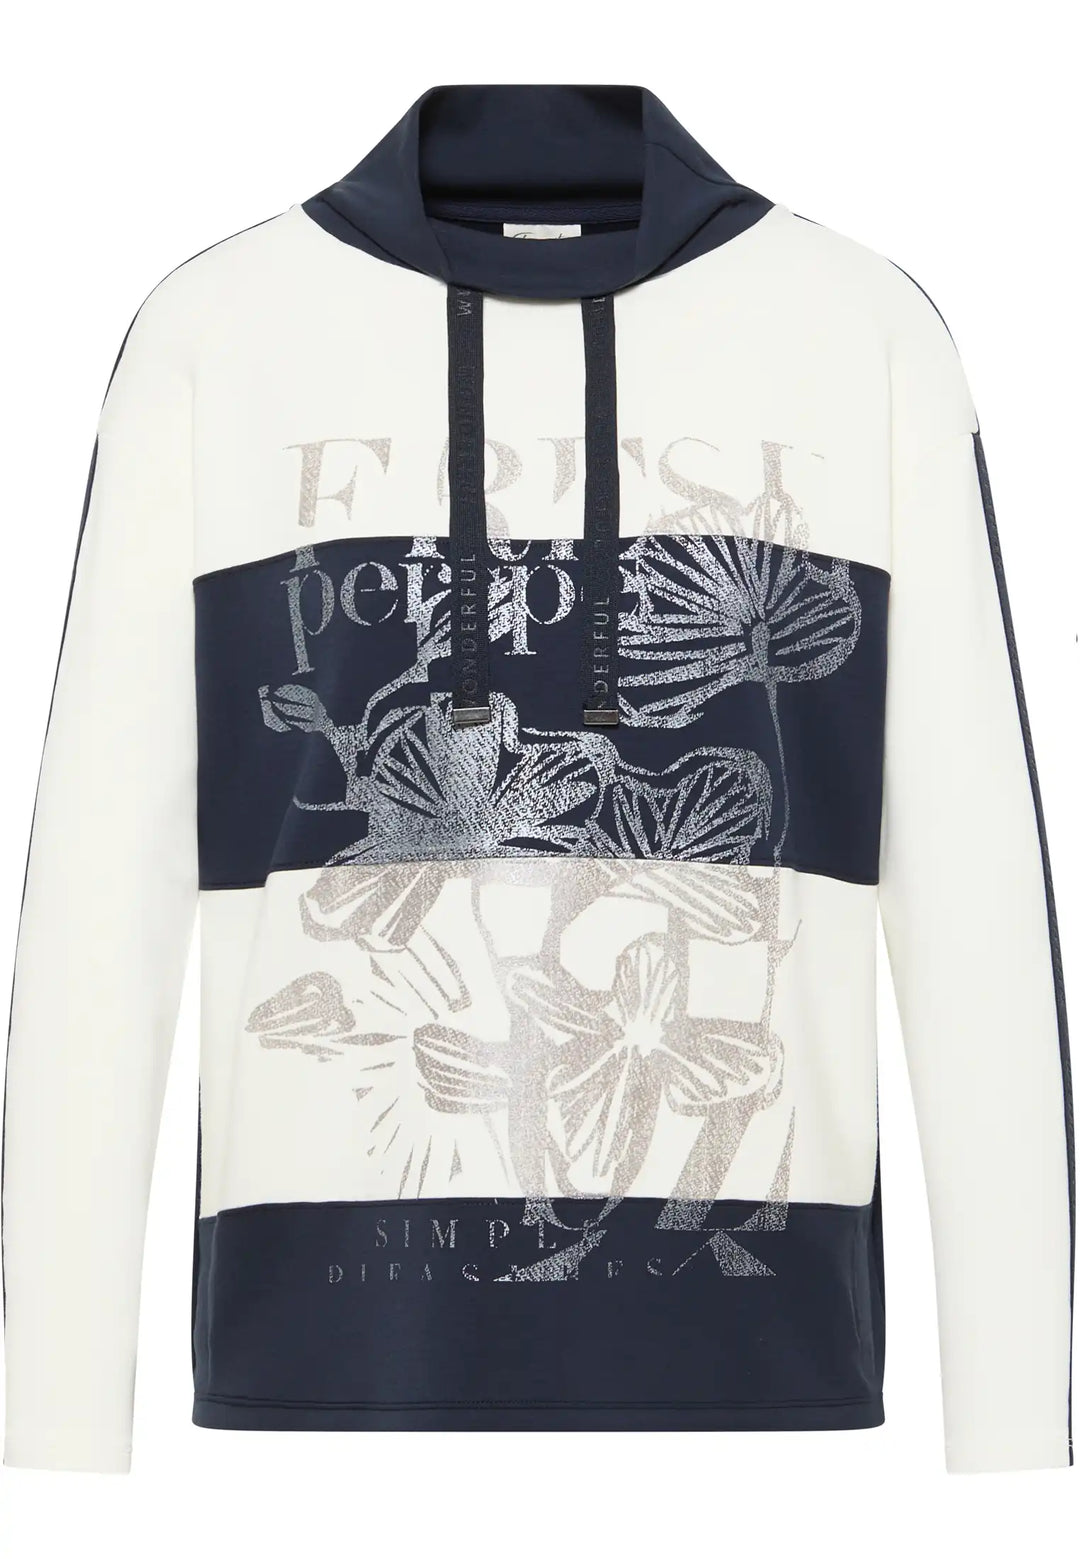 Cream and navy hooded sweatshirt with botanical graphic and typographic design, melding comfort with artistic style, 55770042-870r